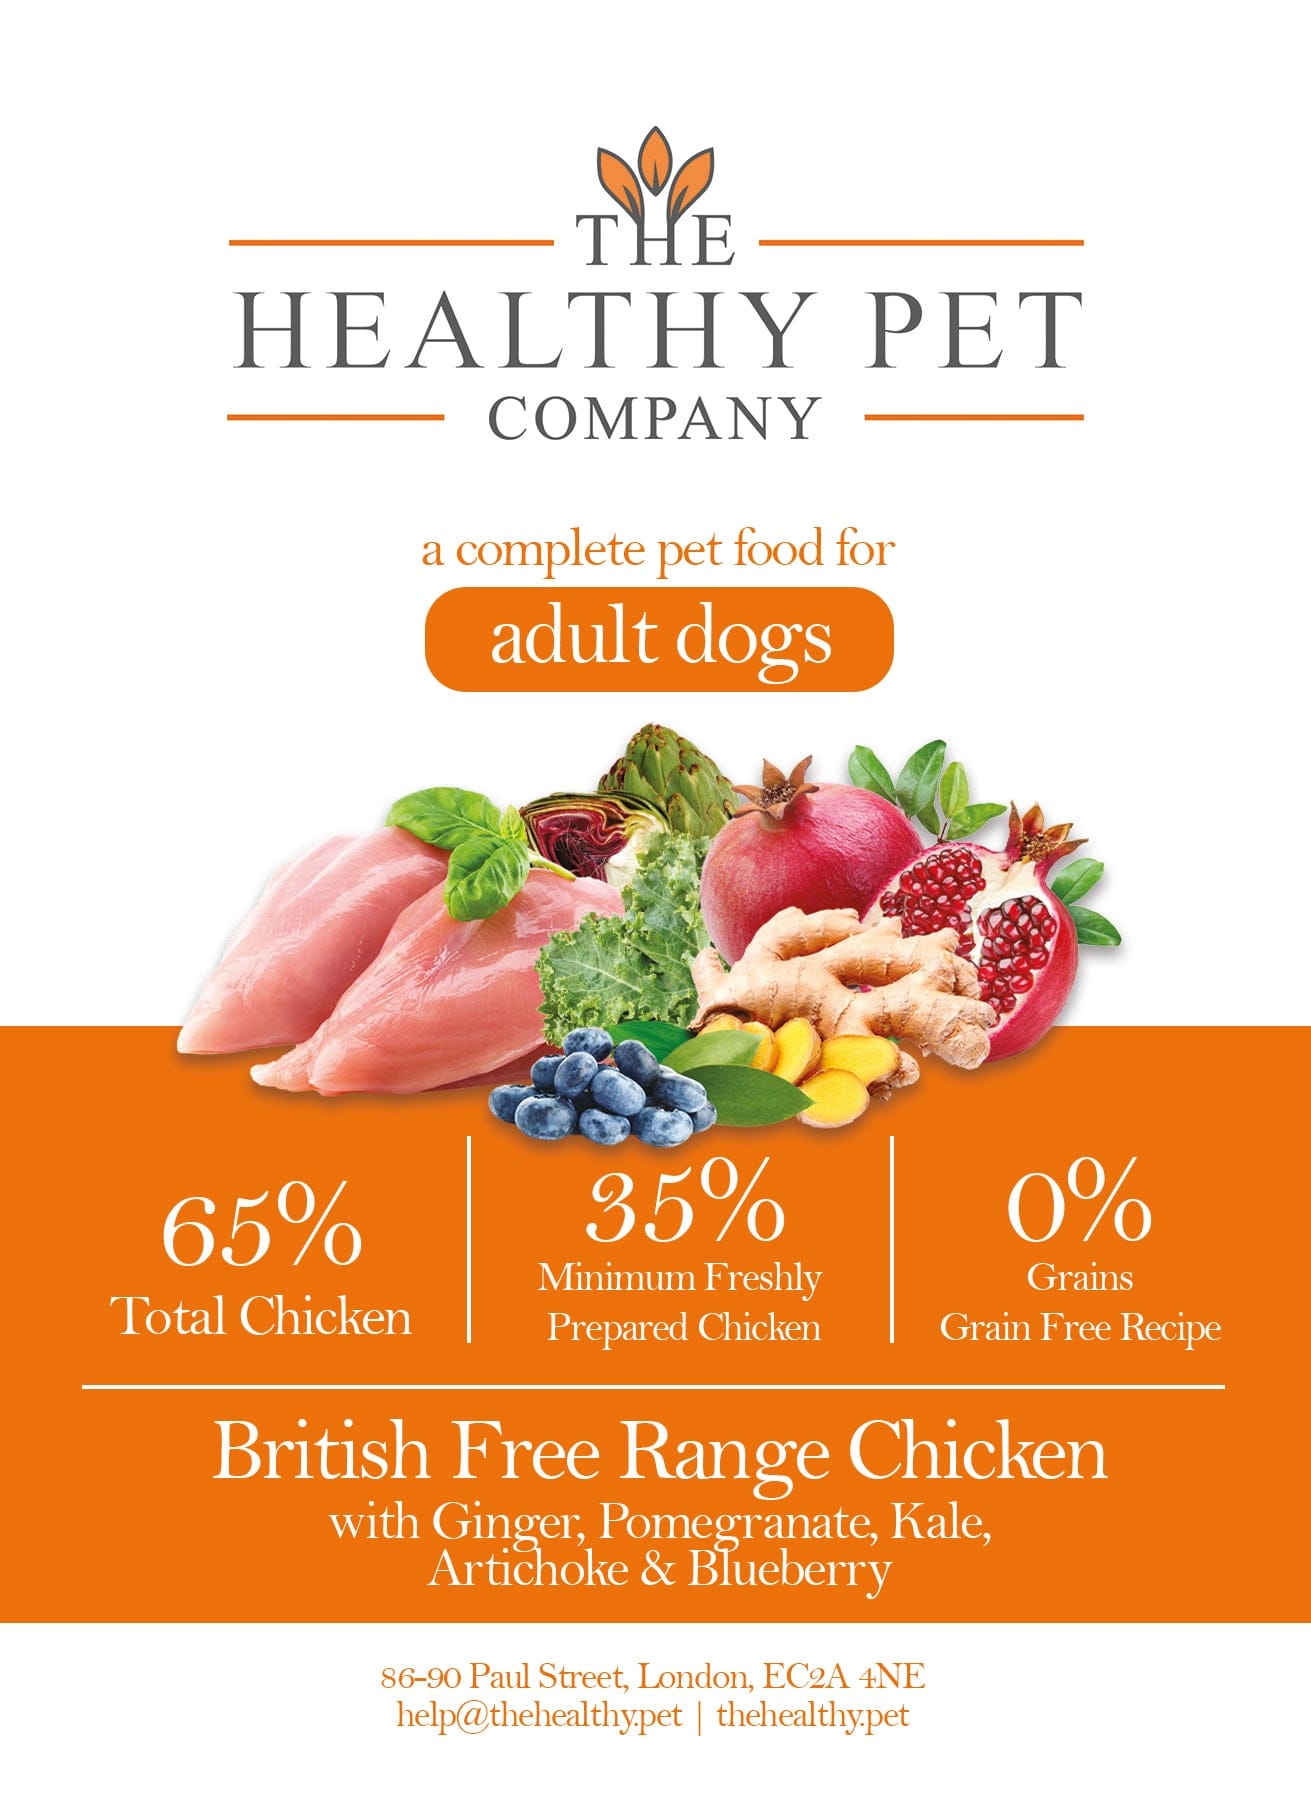 The Healthy Pet Company Complete Meal - Chicken & Mixed Veg for Adult Dogs - The Healthy Pet Company